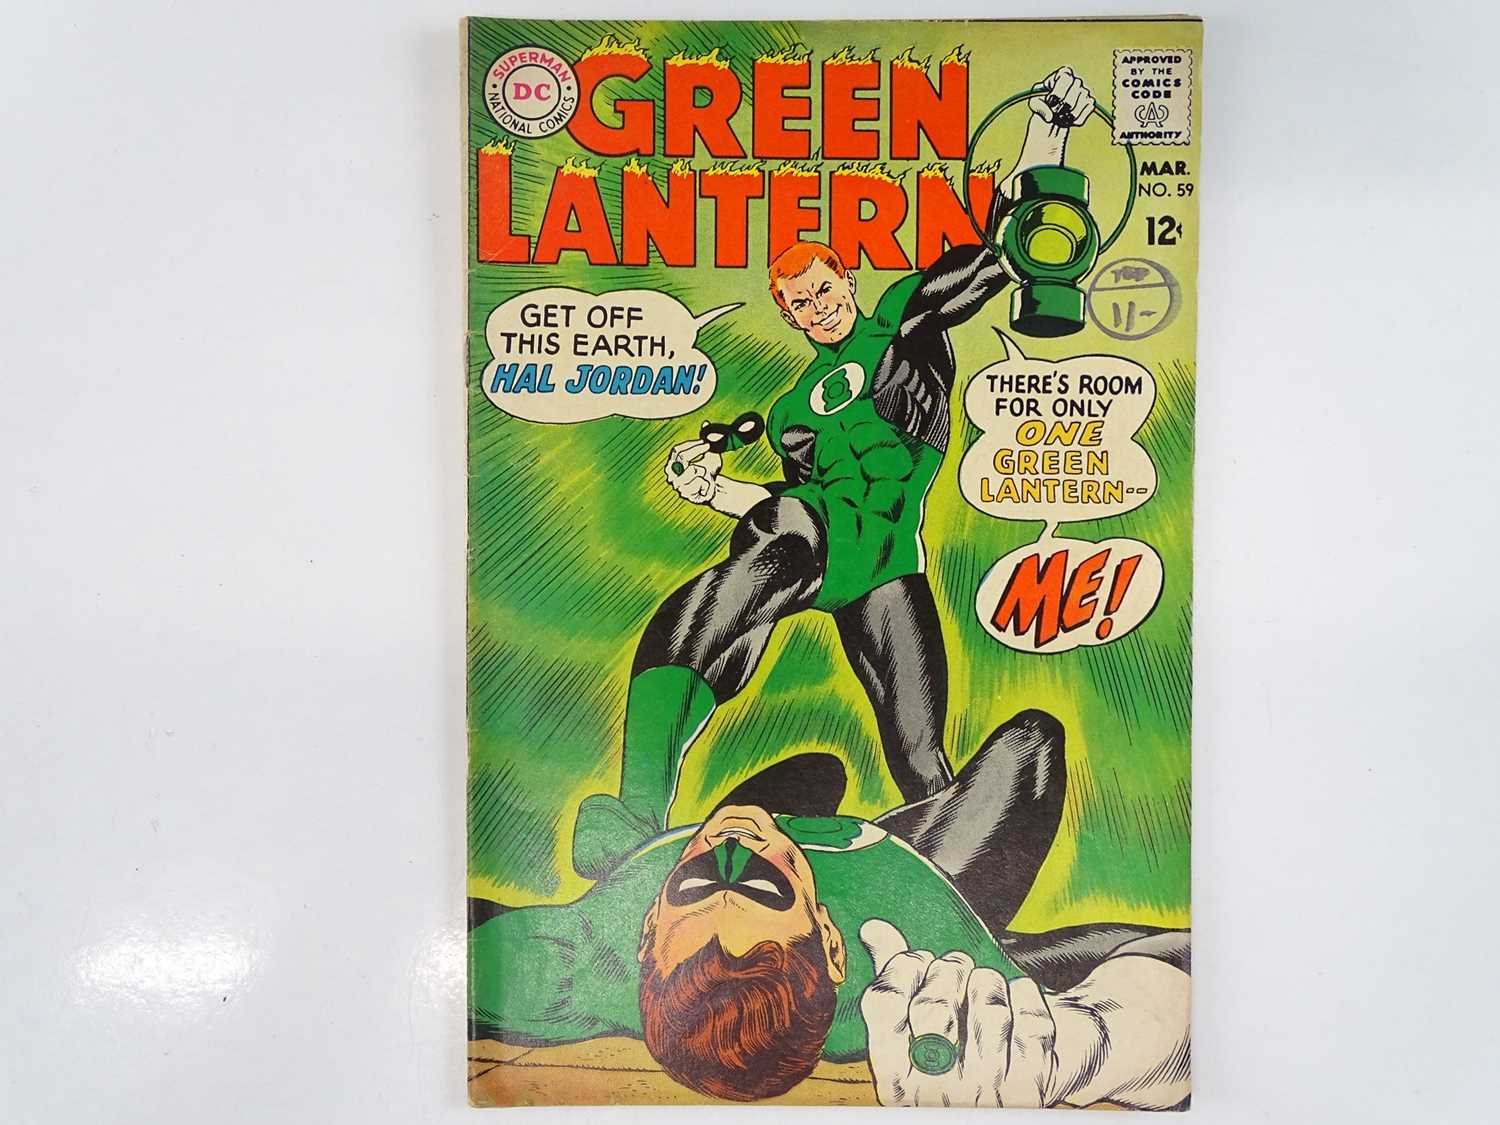 GREEN LANTERN #59 - (1968 - DC - UK Cover Price) - Classic DC Cover + KEY Book - First appearance of